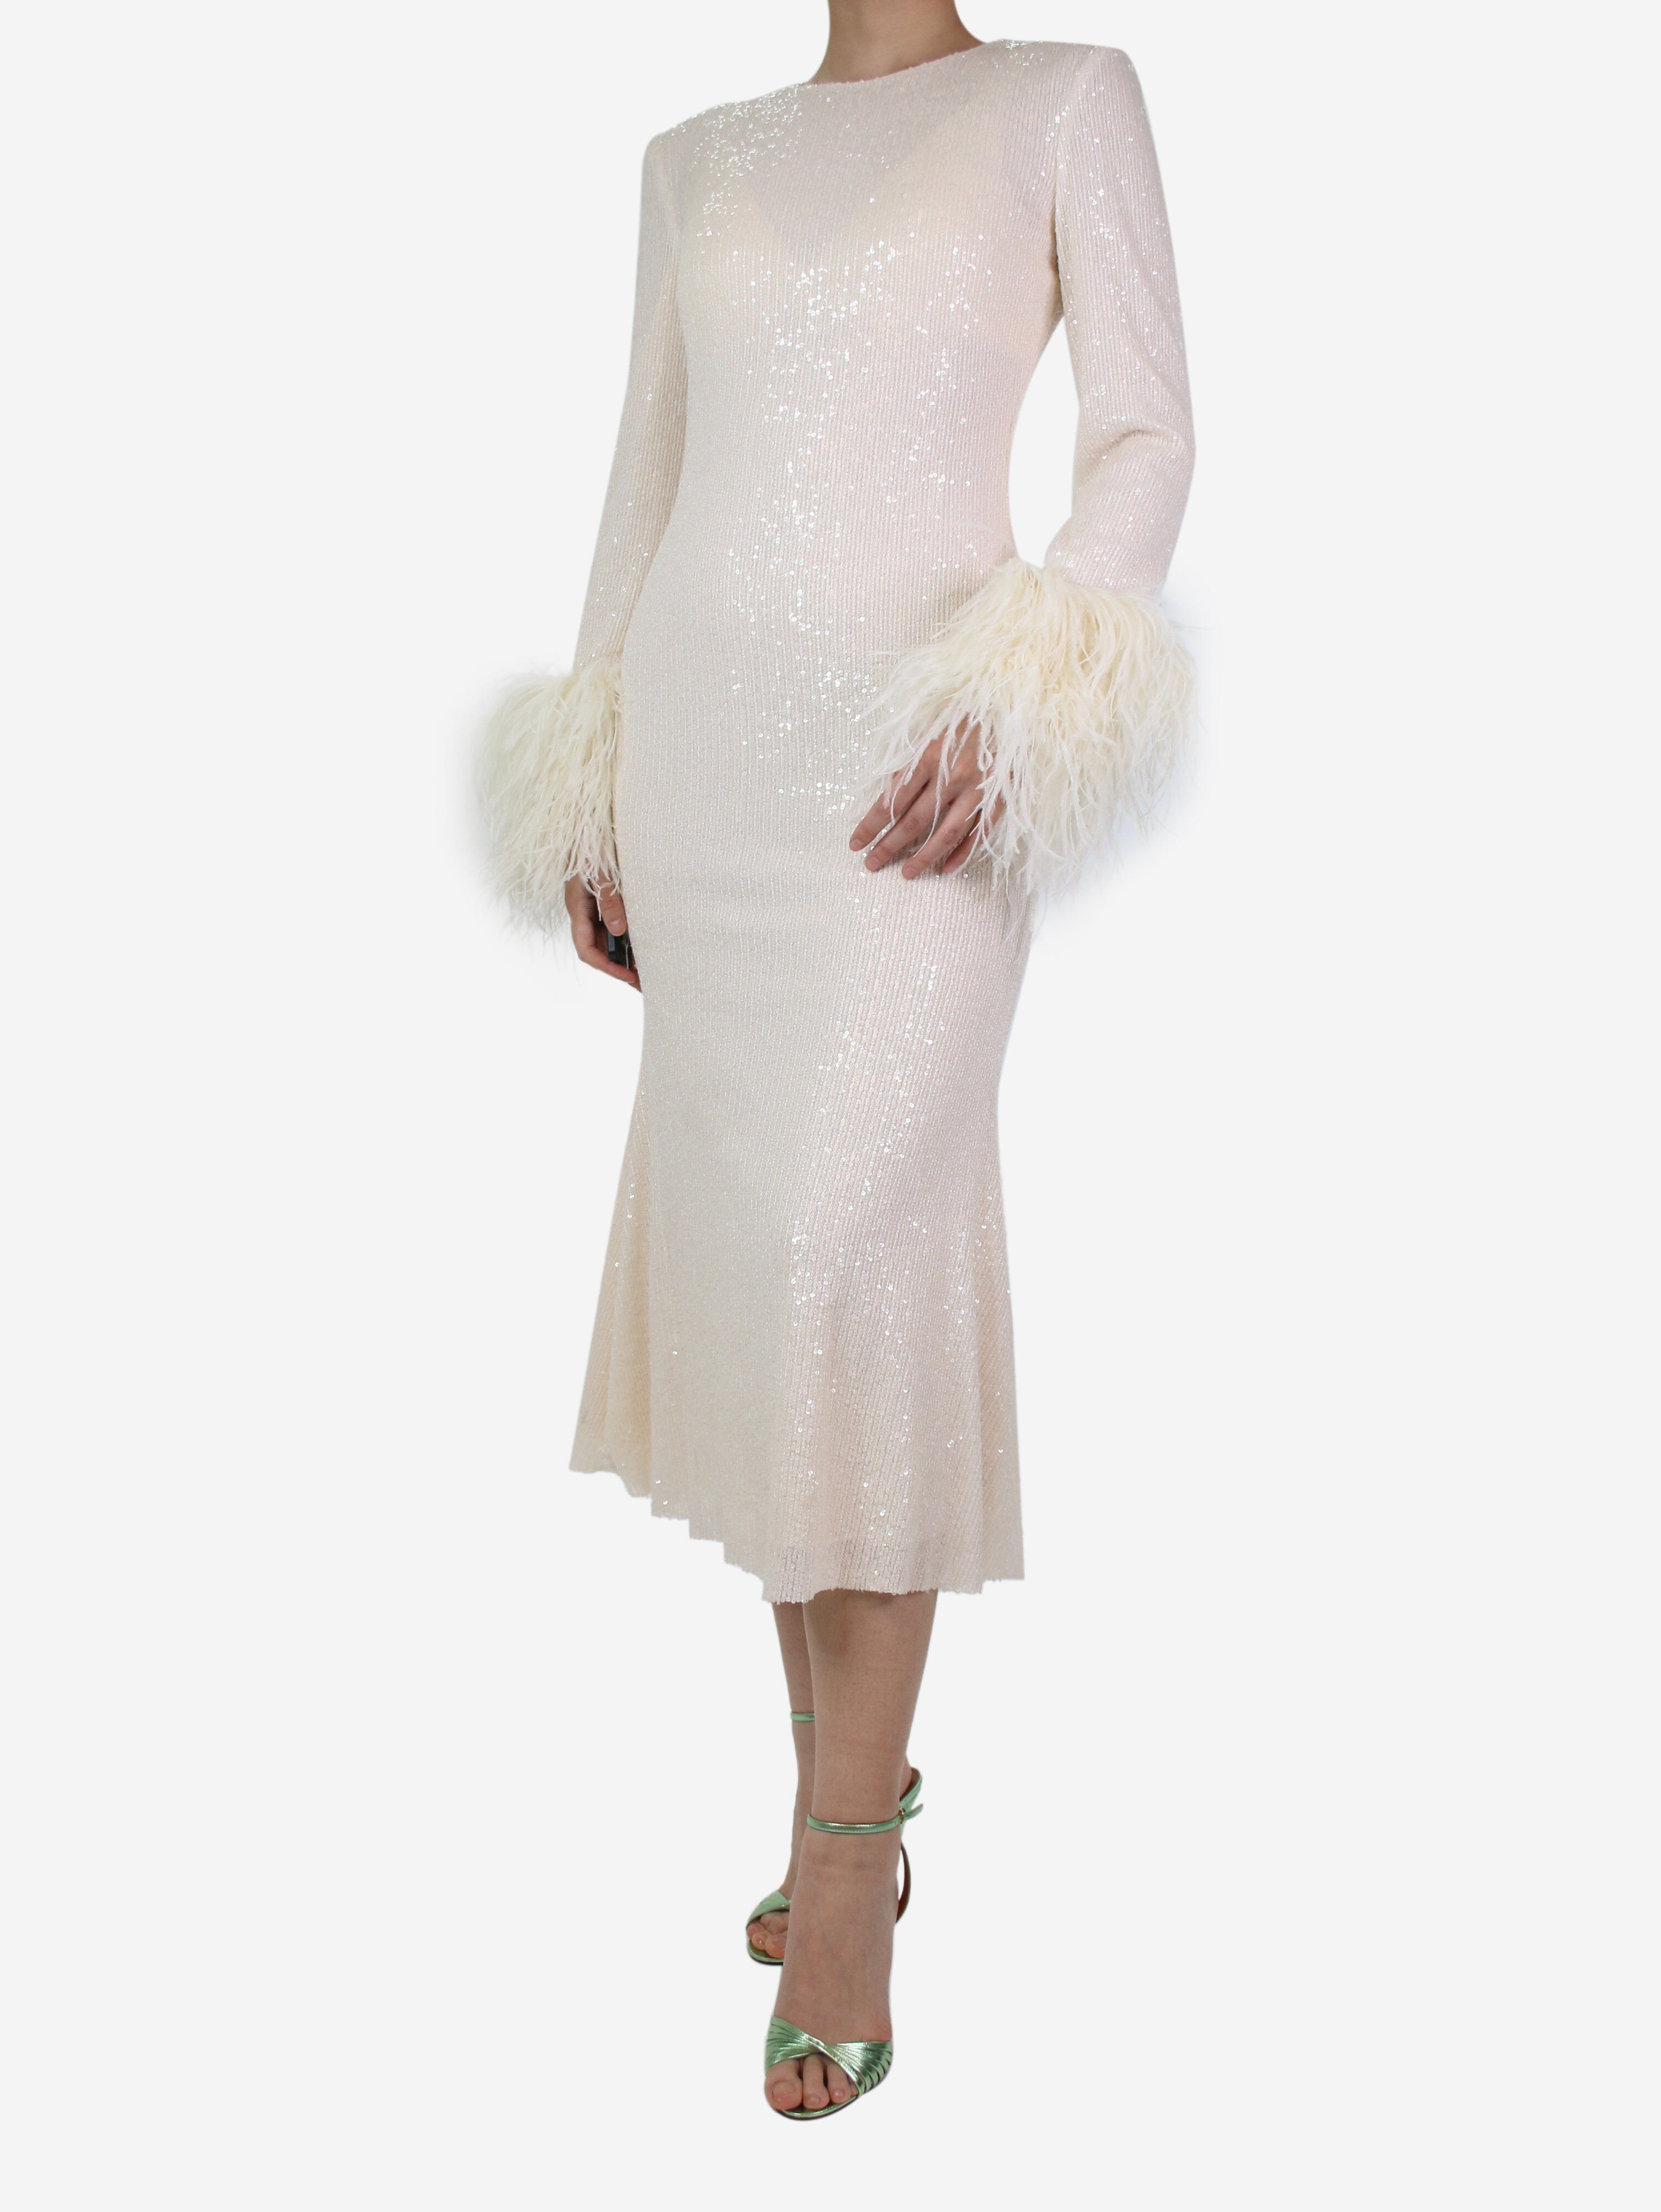 Cream feather-trimmed sequined dress - size UK 10